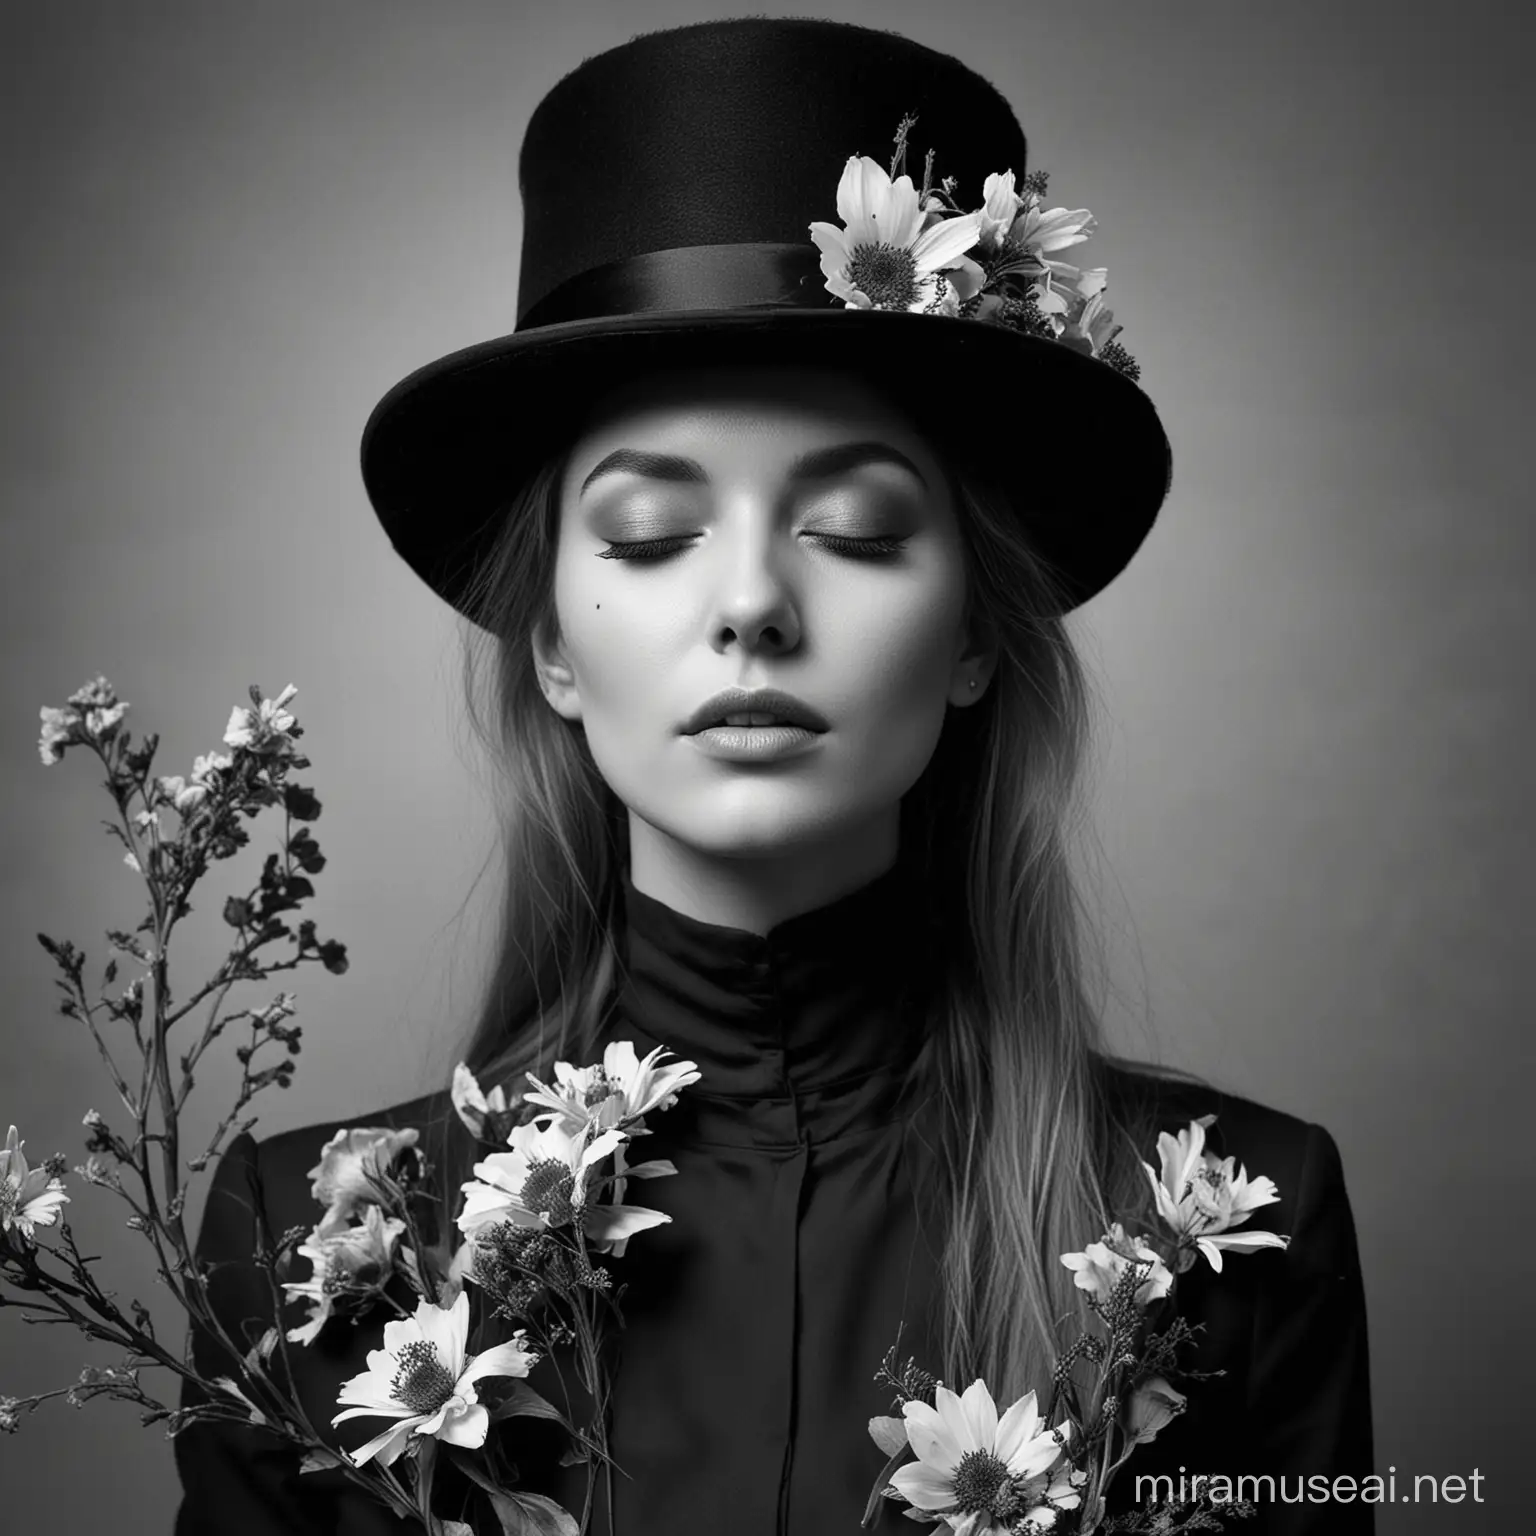 Fashion Model in Top Hat with Closed Eyes and Dead Flowers